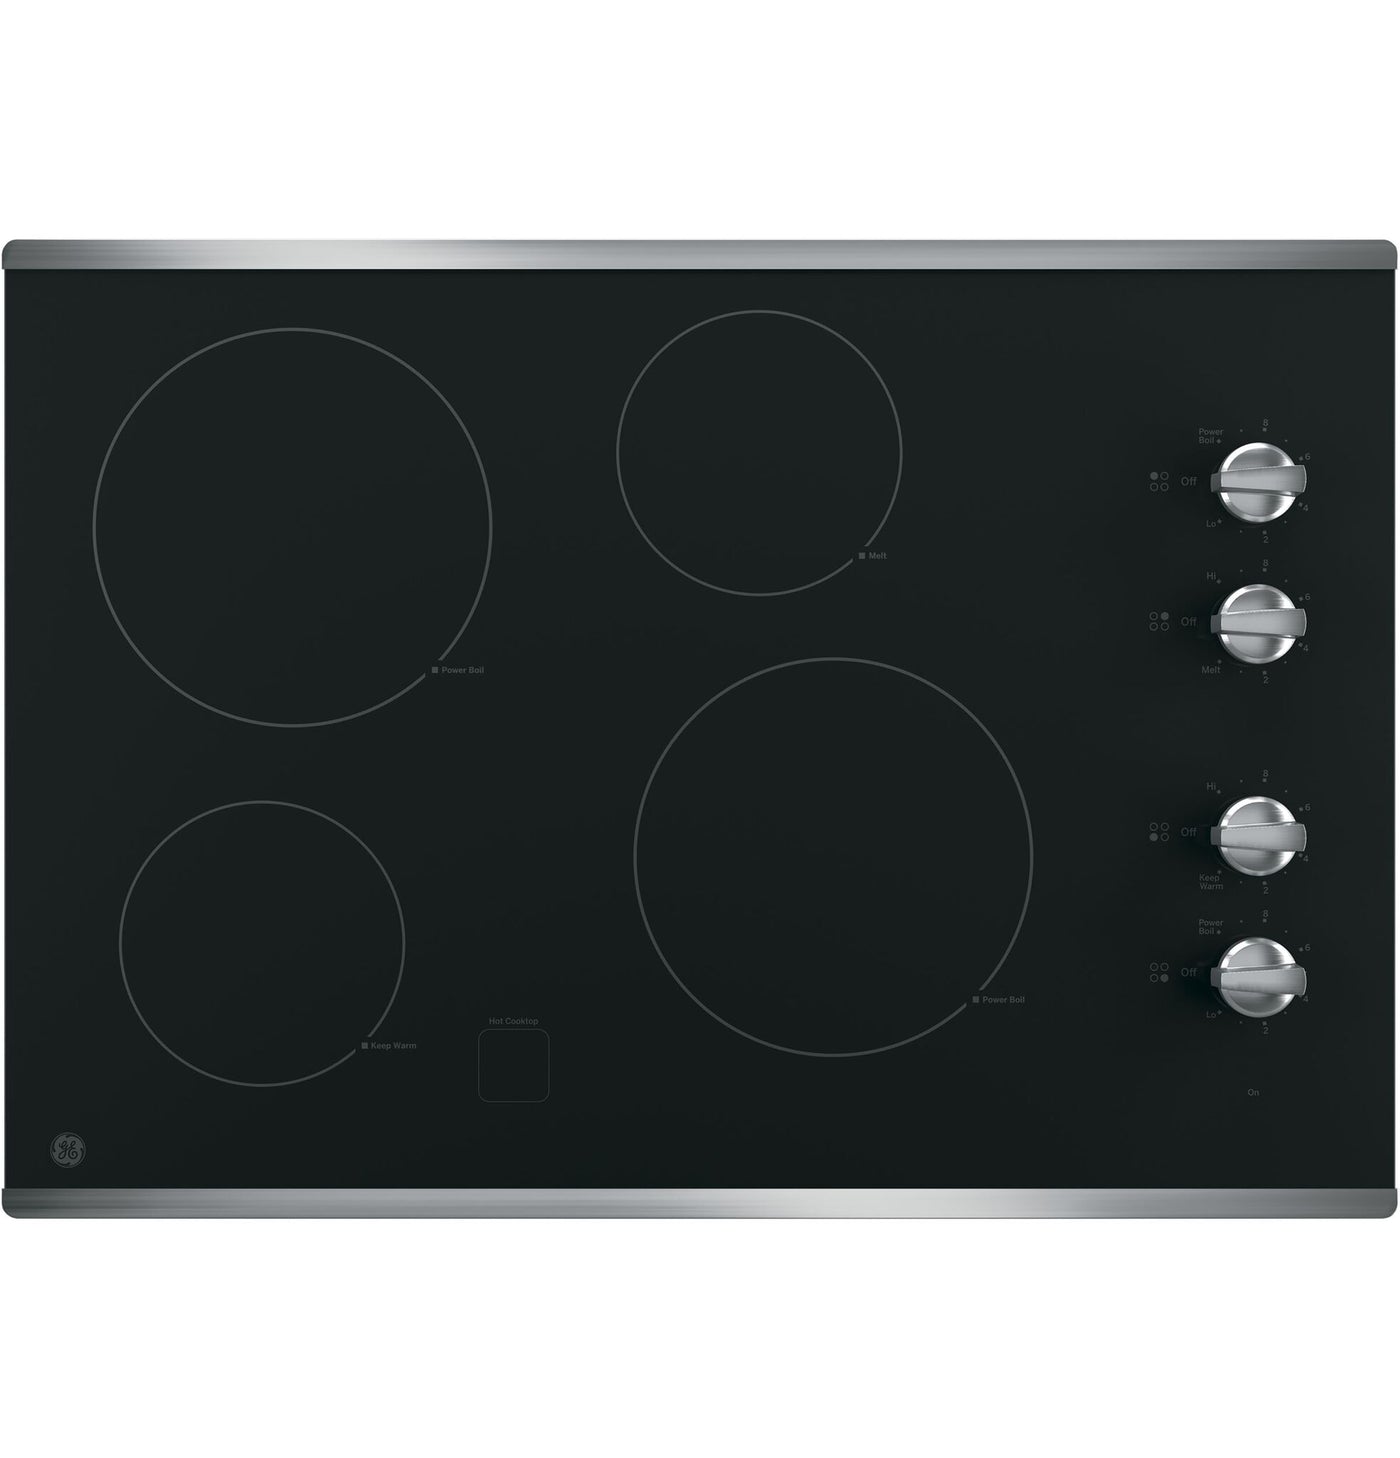 GE Black Stainless 30" Built-In Knob Control Electric Cooktop - JP3030SWSS